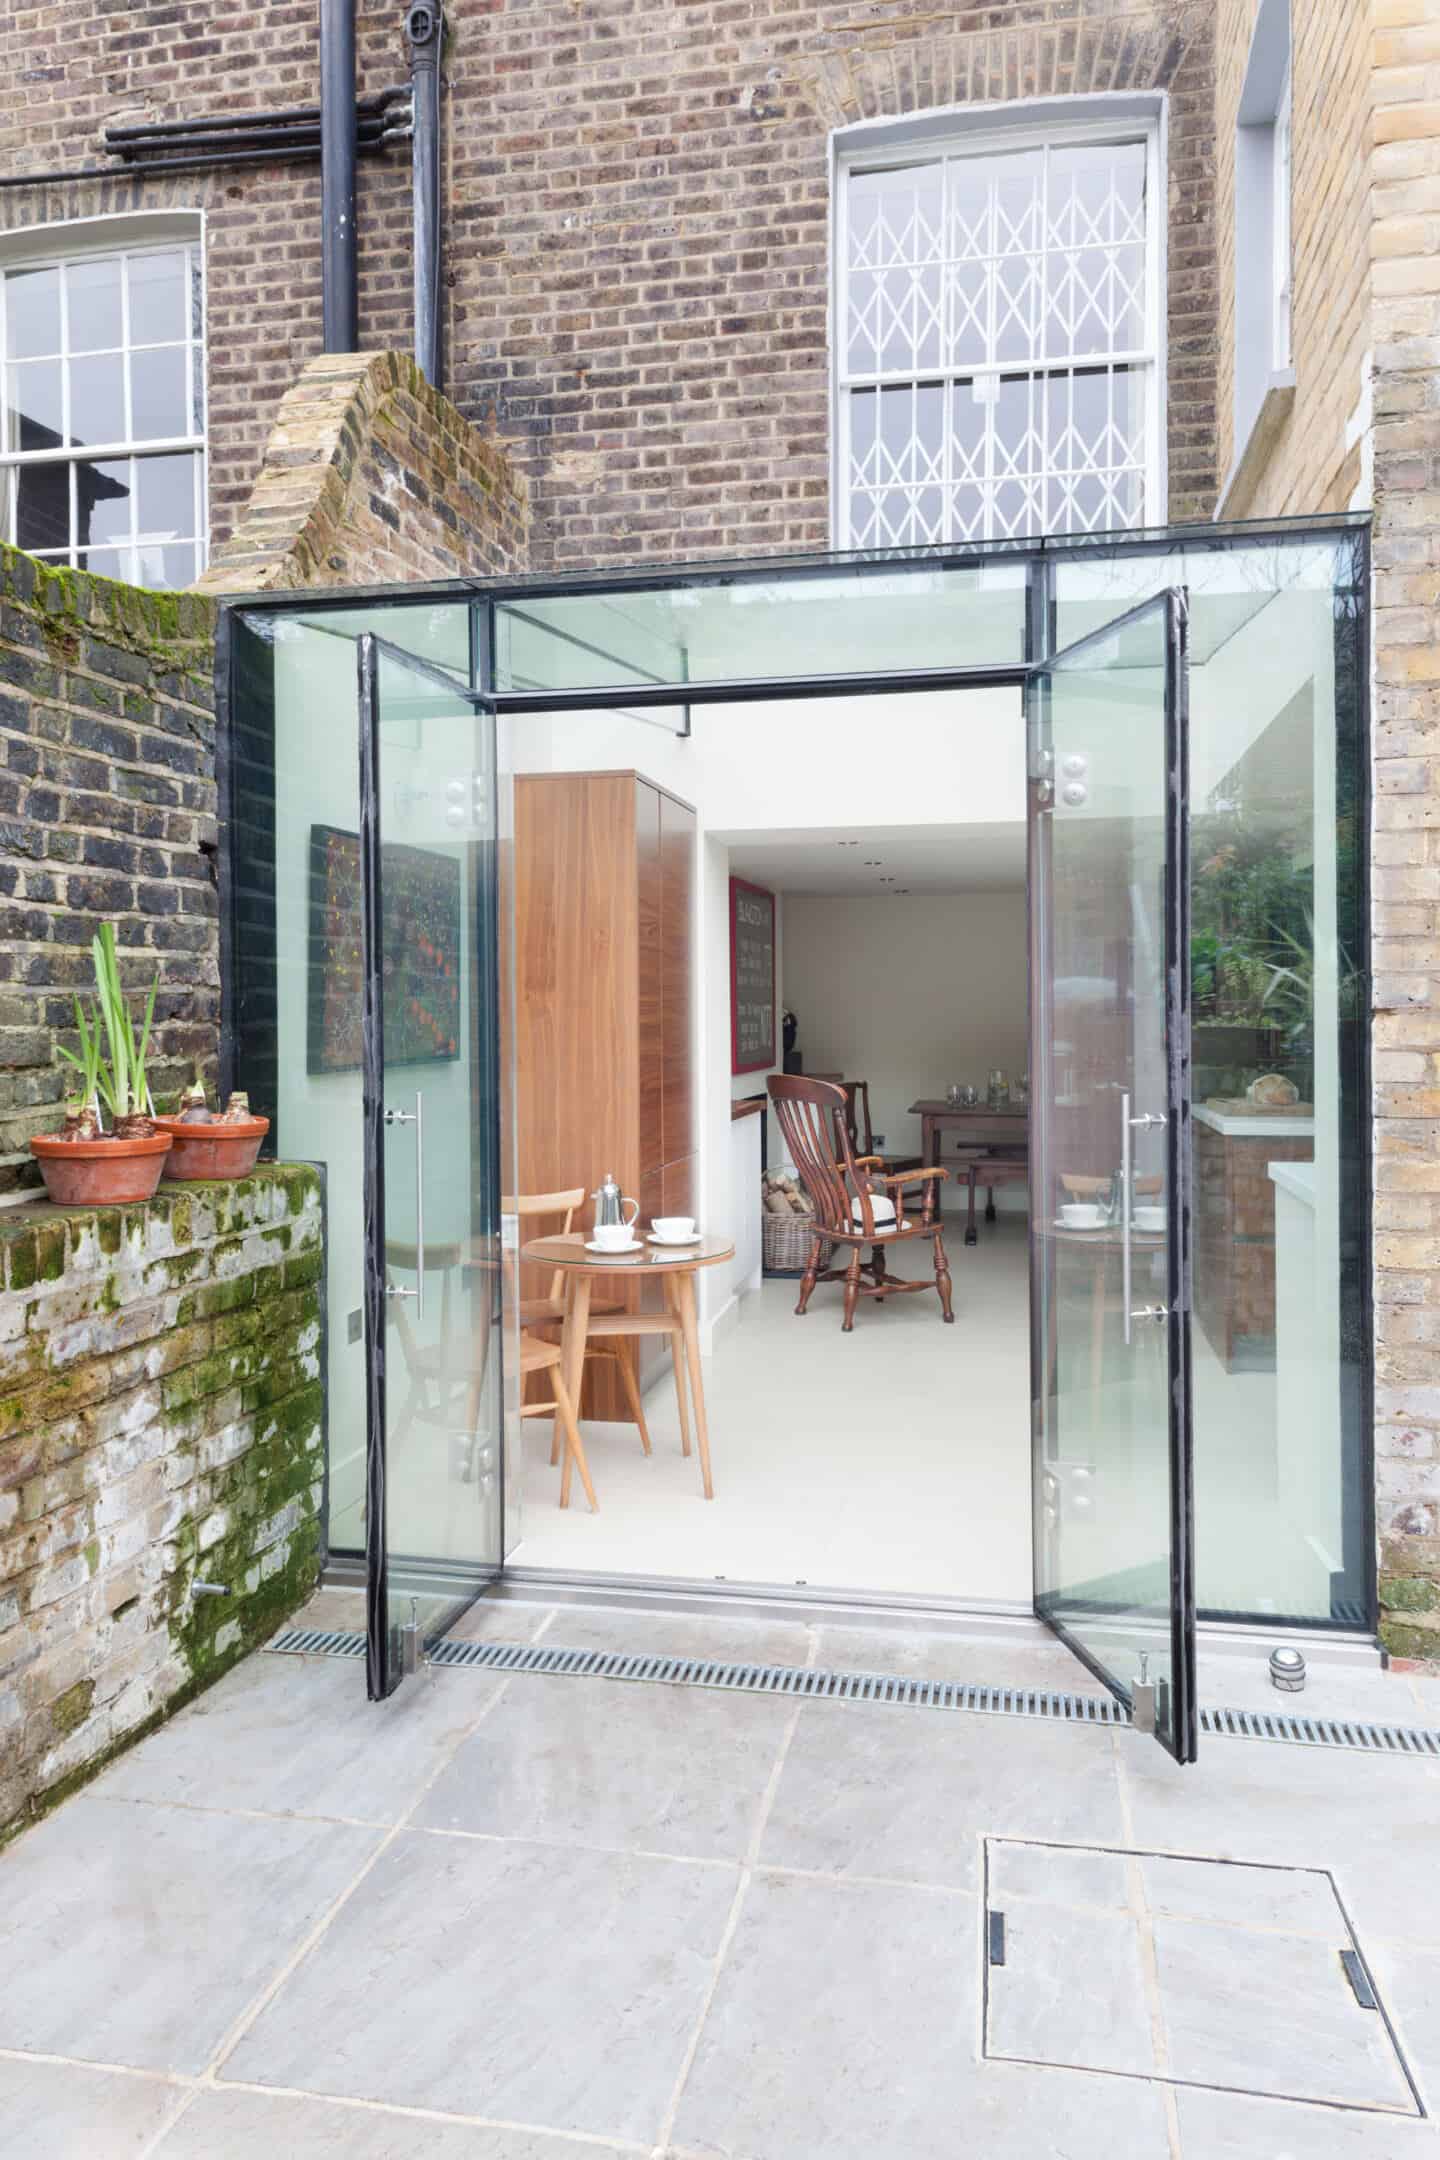 A glass box rear extension floods a kitchen with natural light